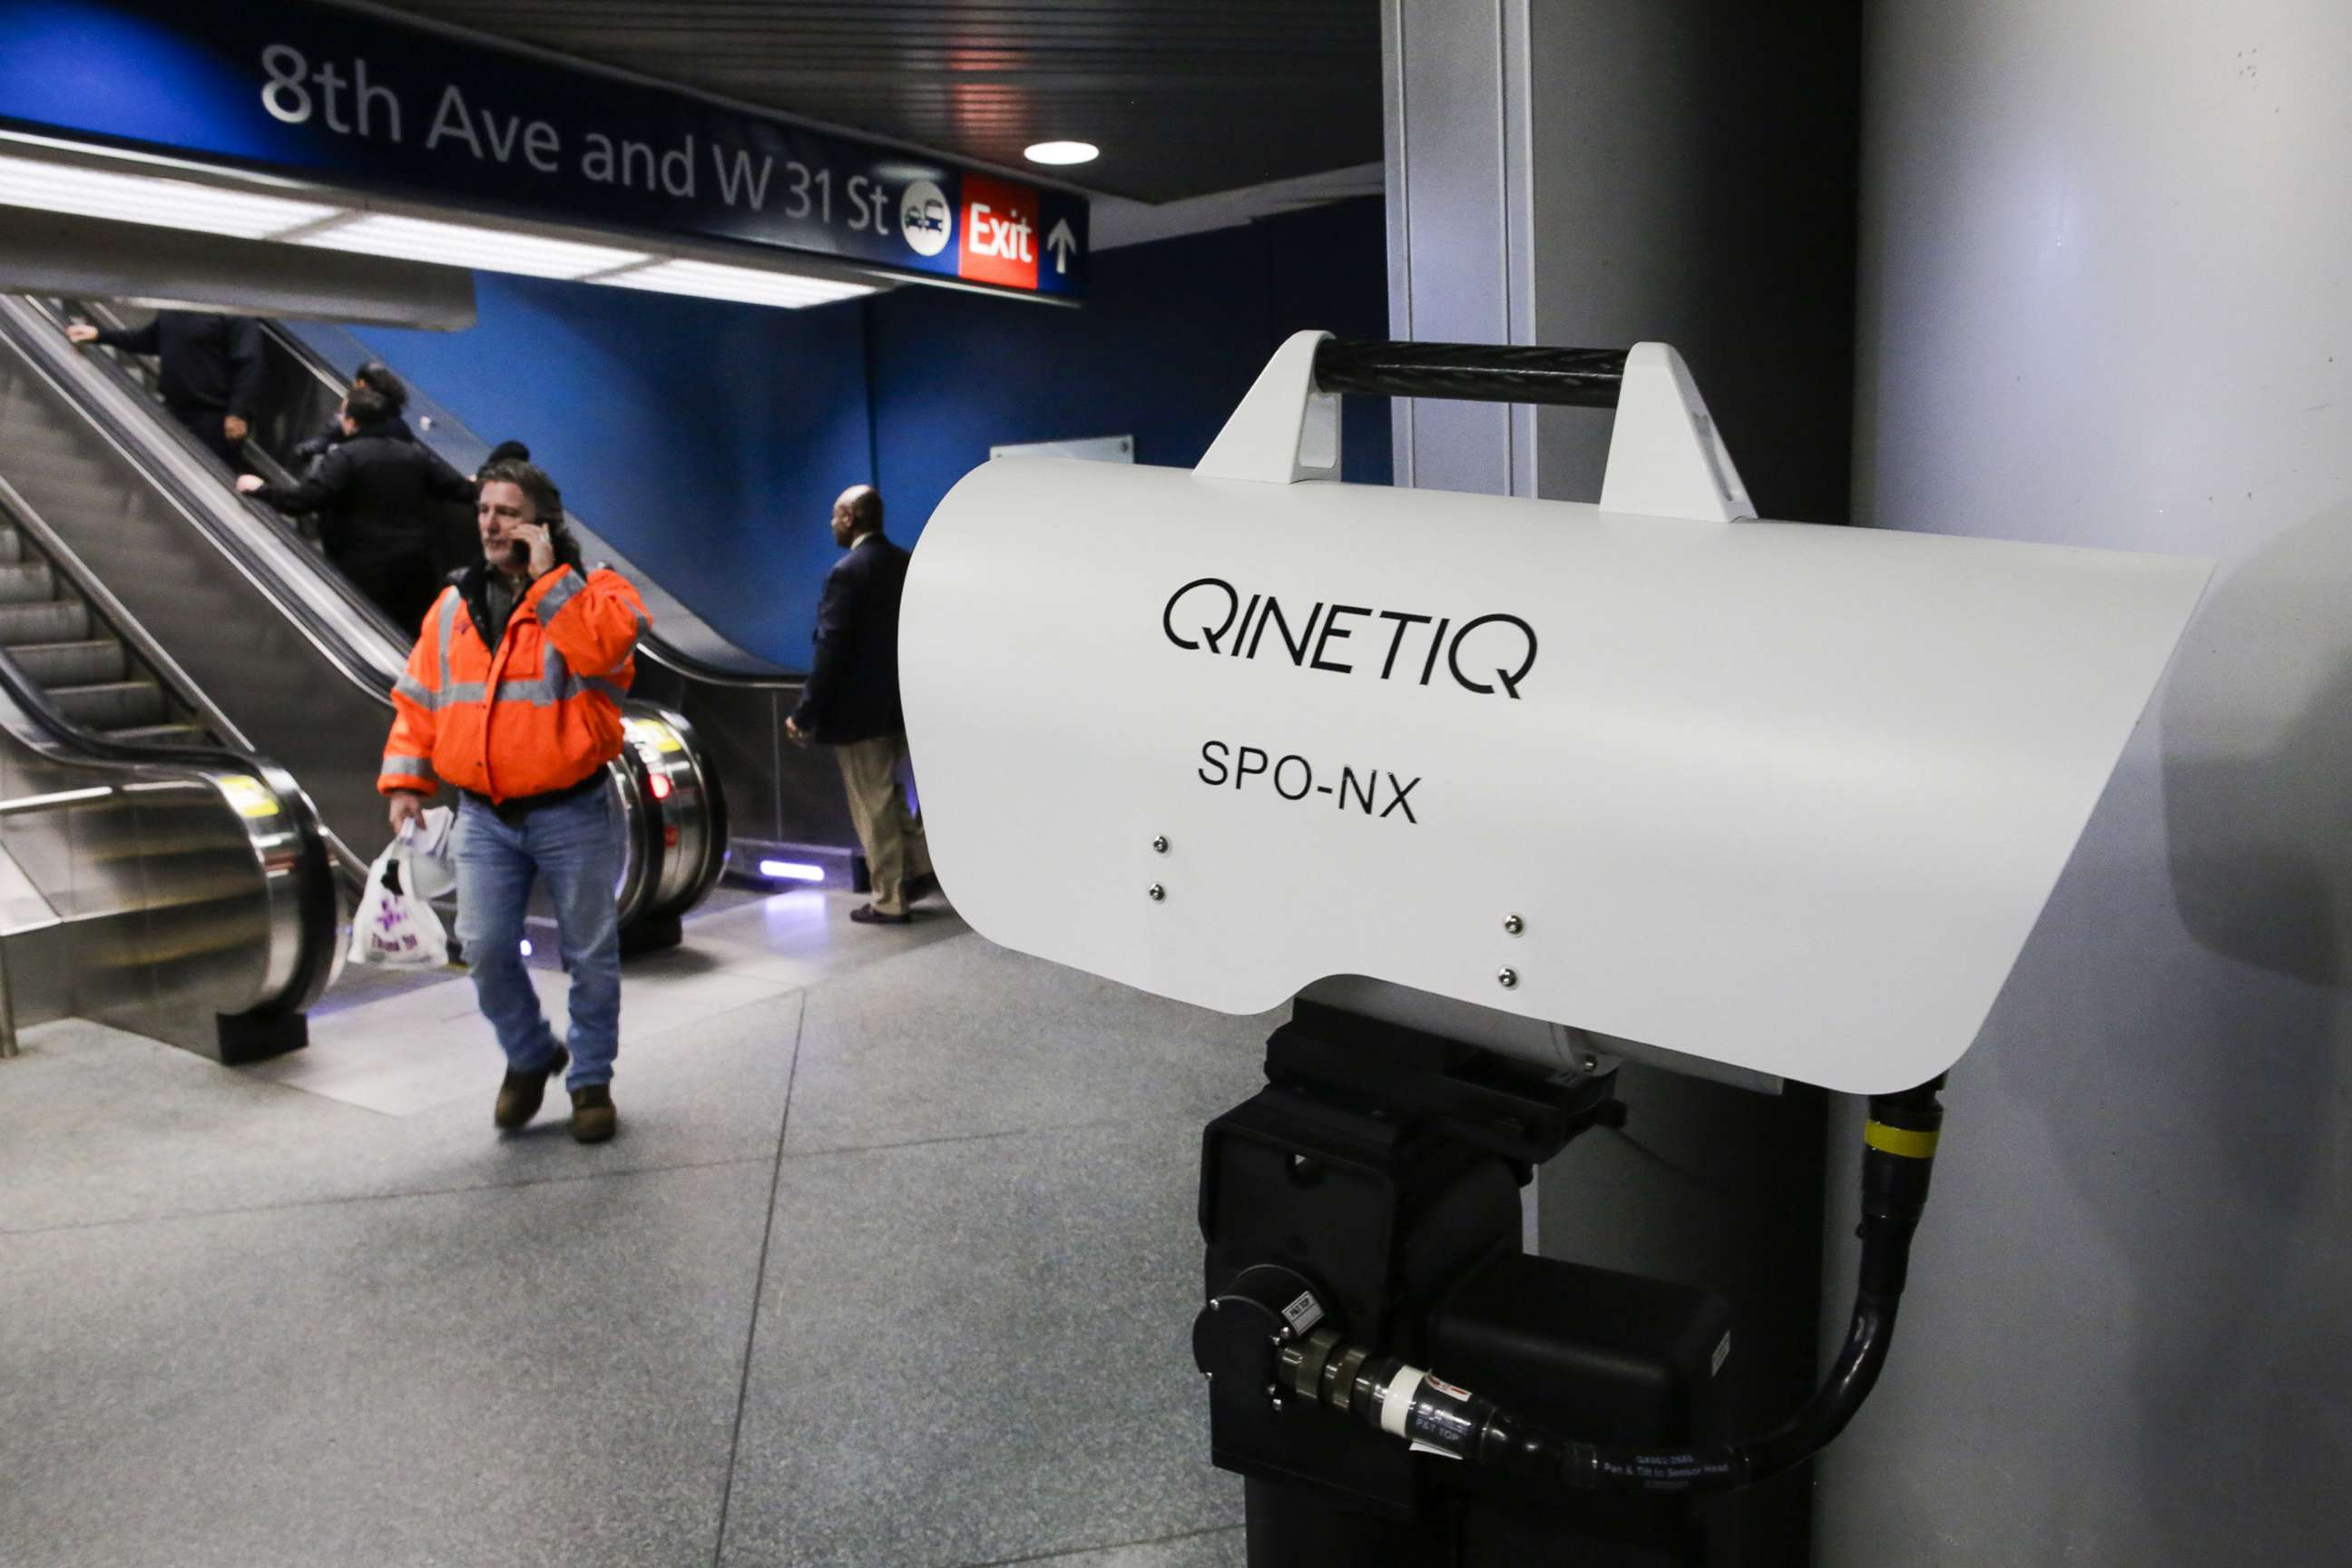 PHOTO: Pedestrians walk past a device designed to detect explosives at New York City's Penn Station on Feb. 27, 2018.